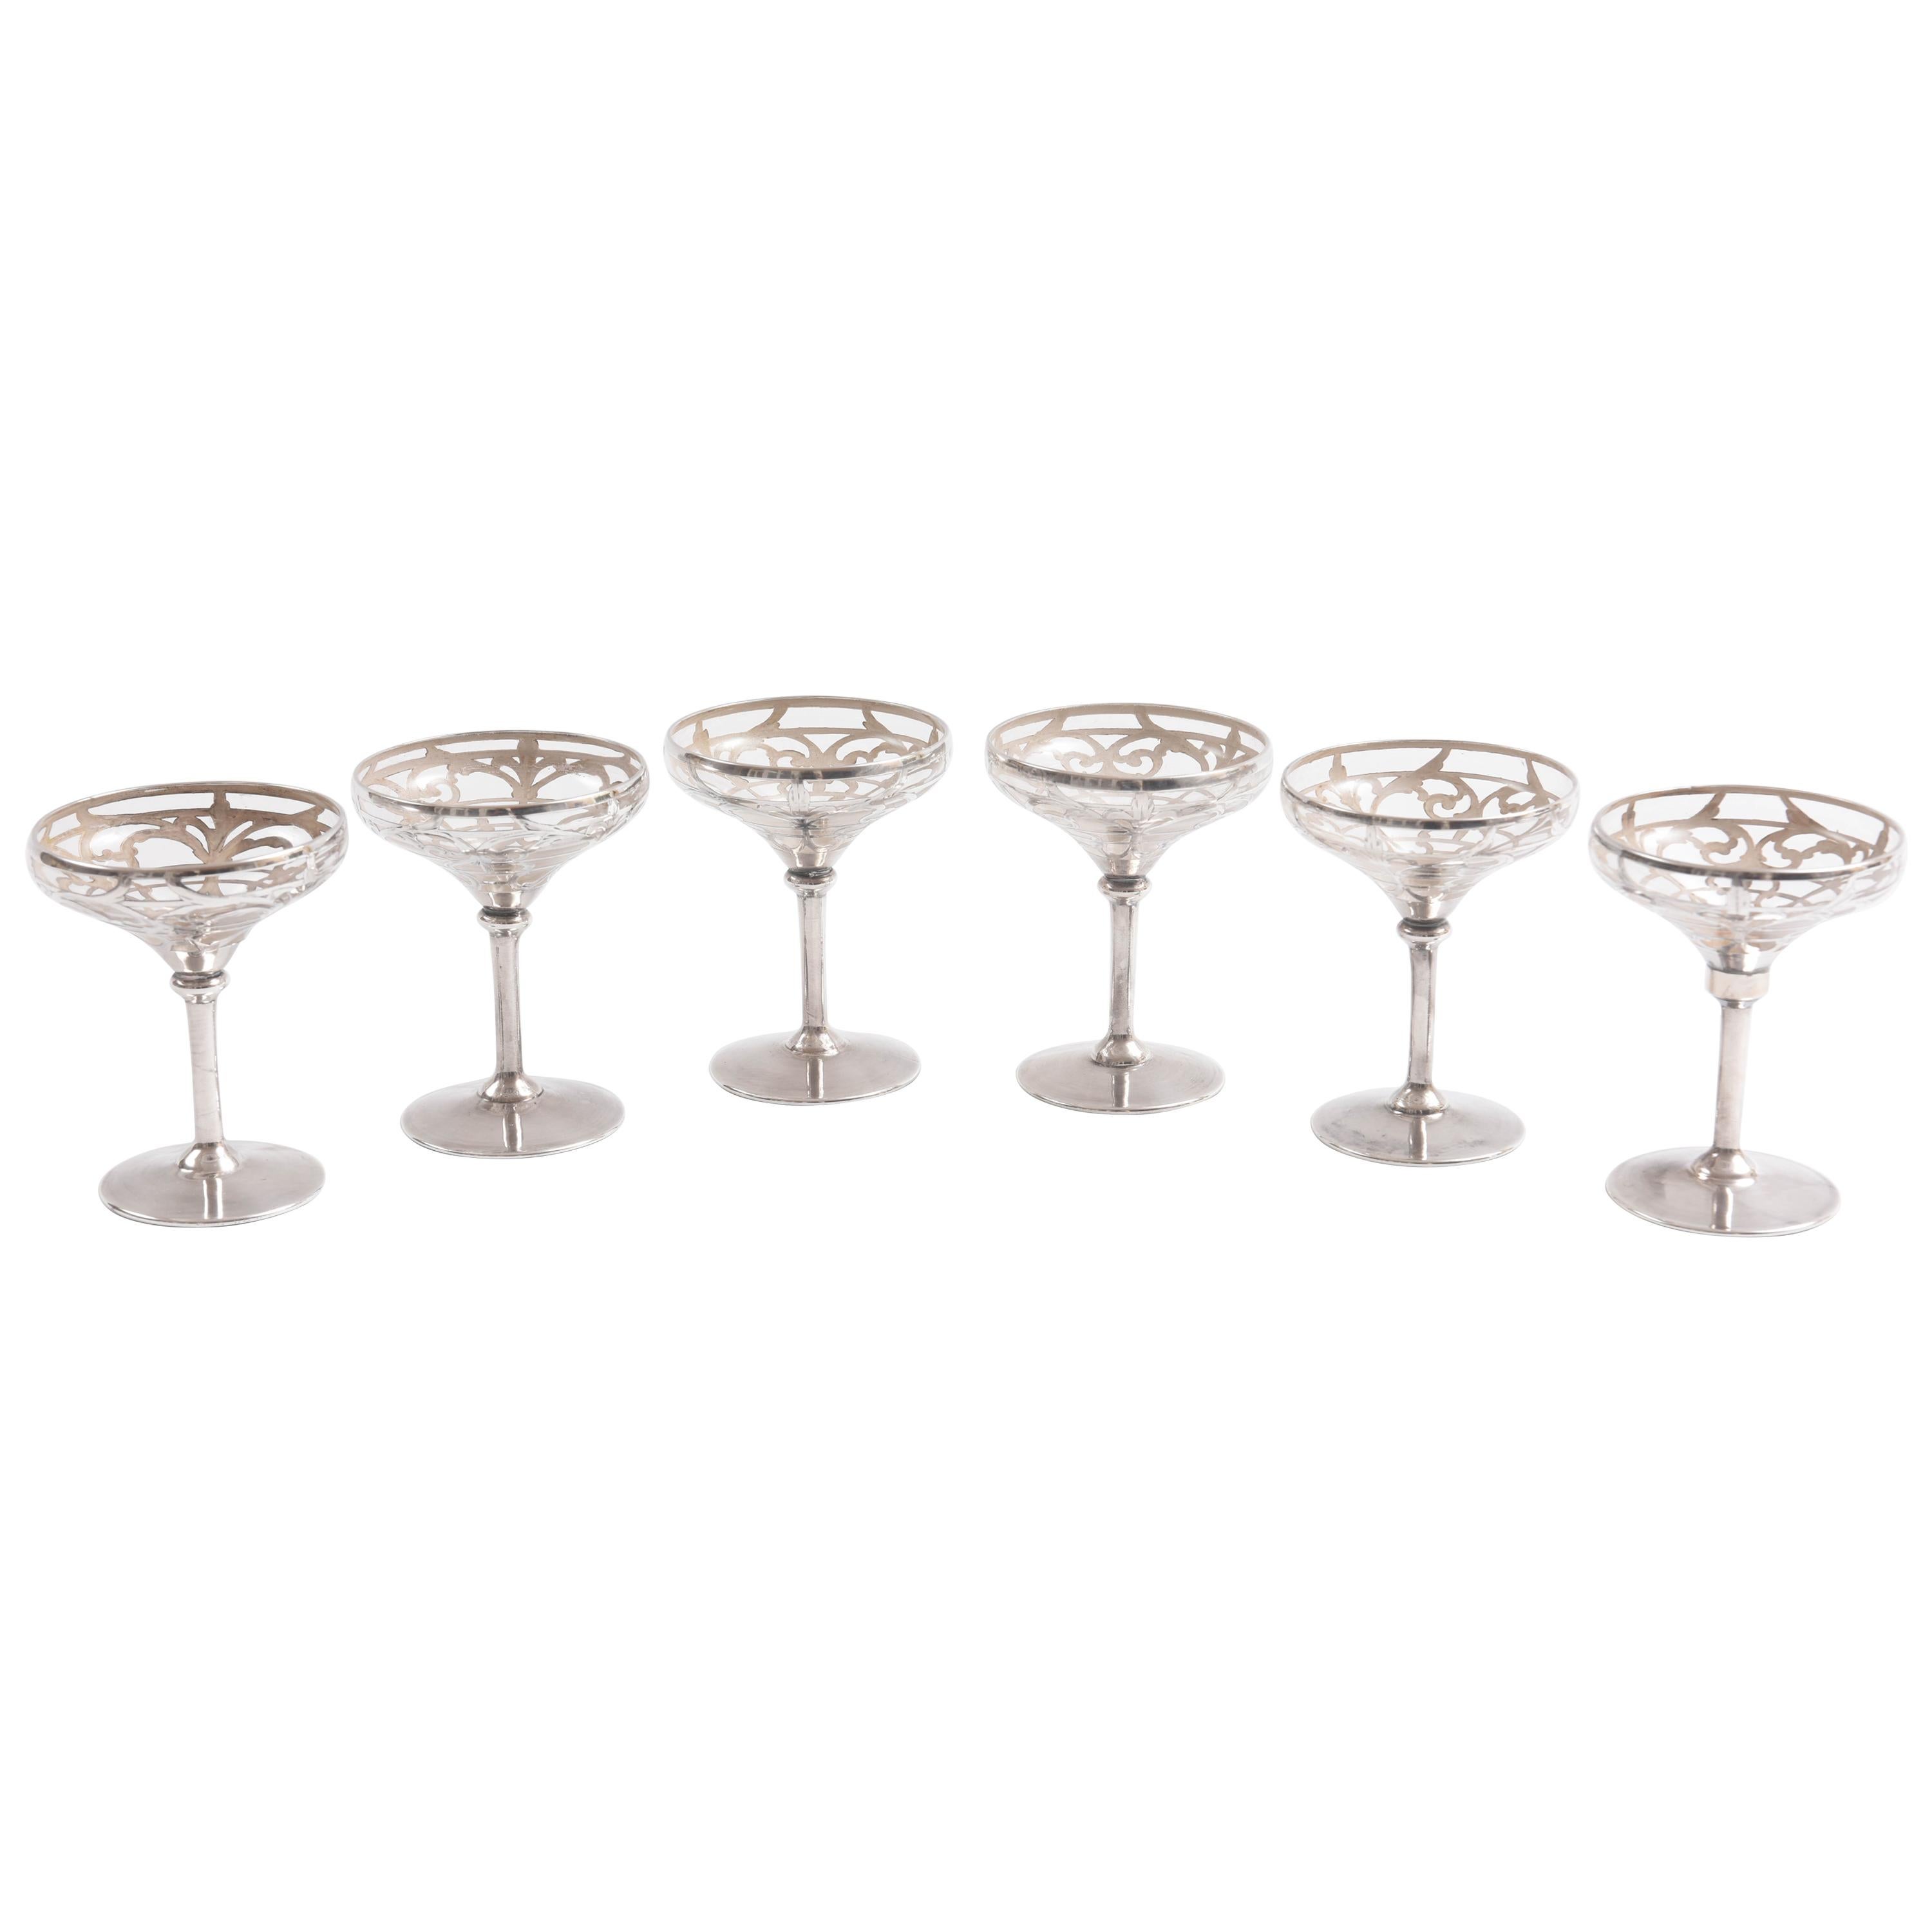 Six Sterling Overlay Champagne Coupes, Antique Art Nouveau